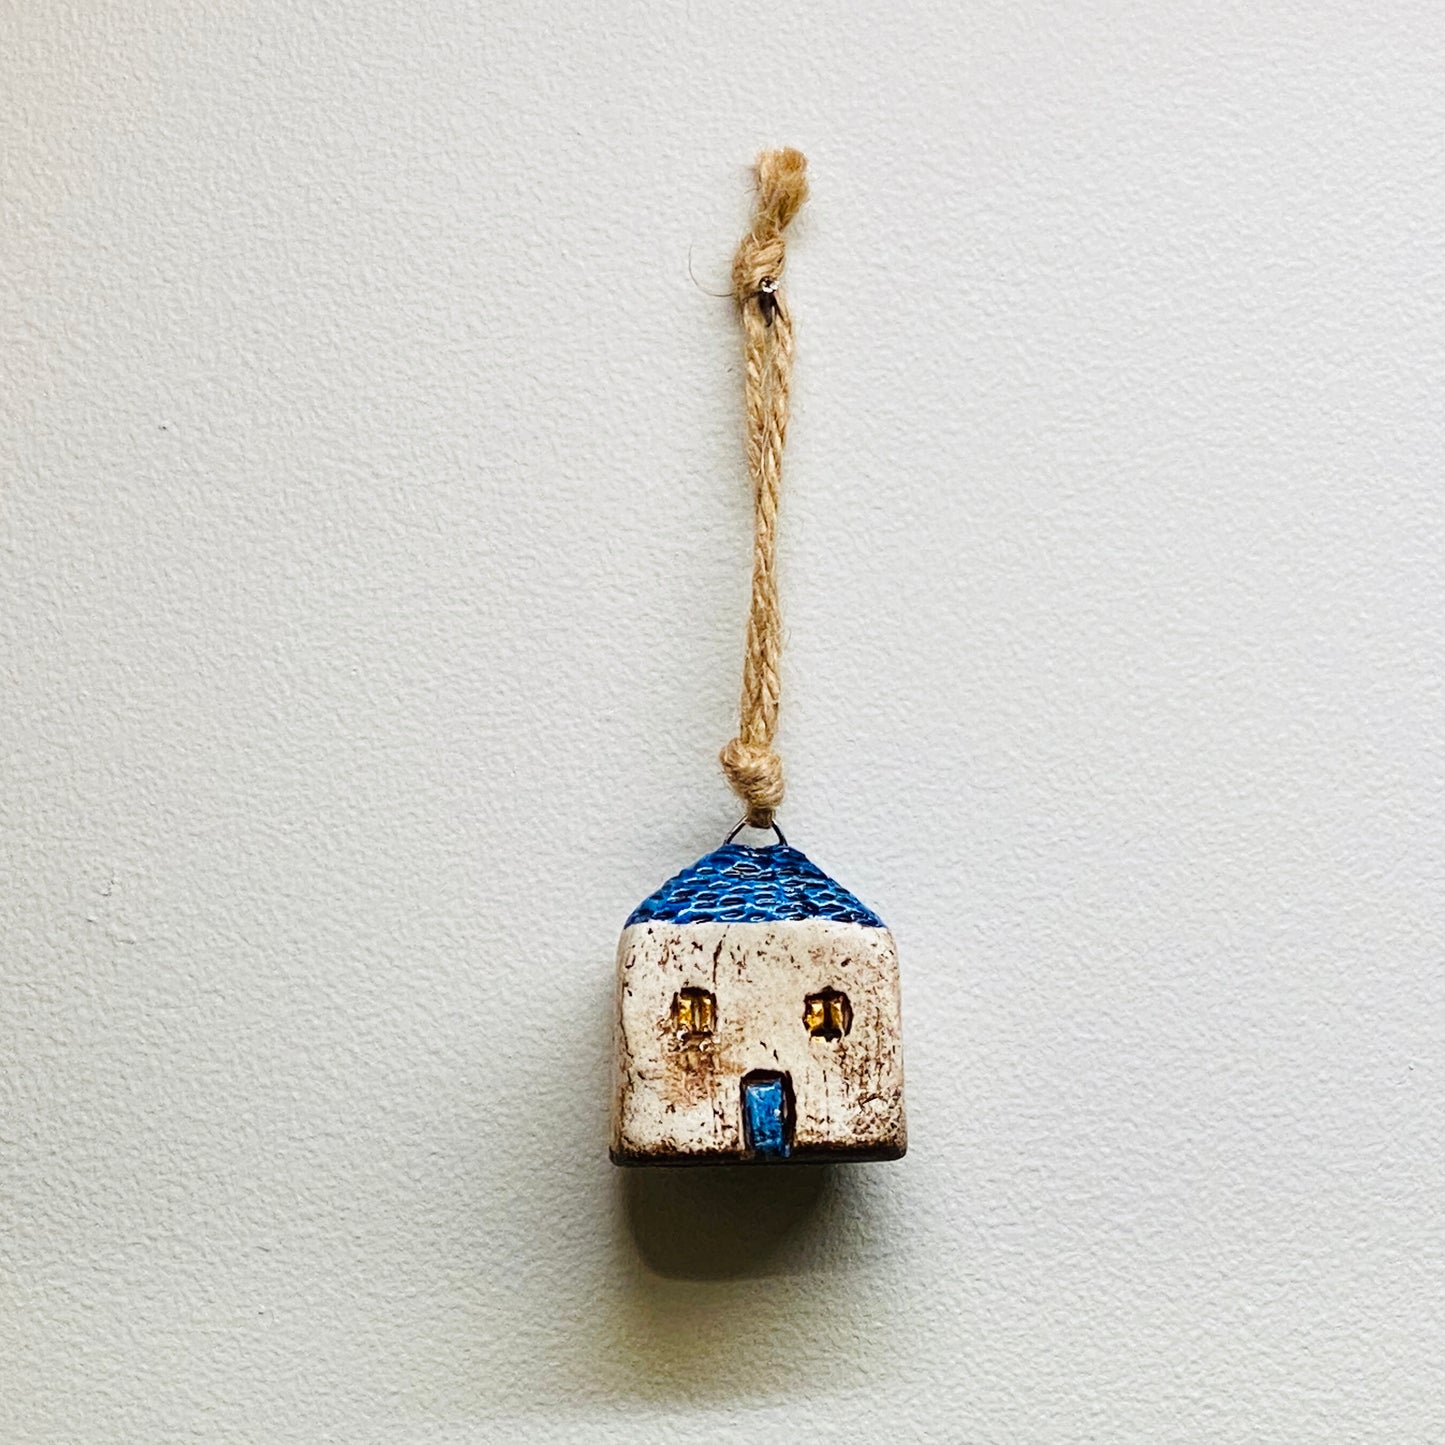 I Love You Dad Blue House Ornament